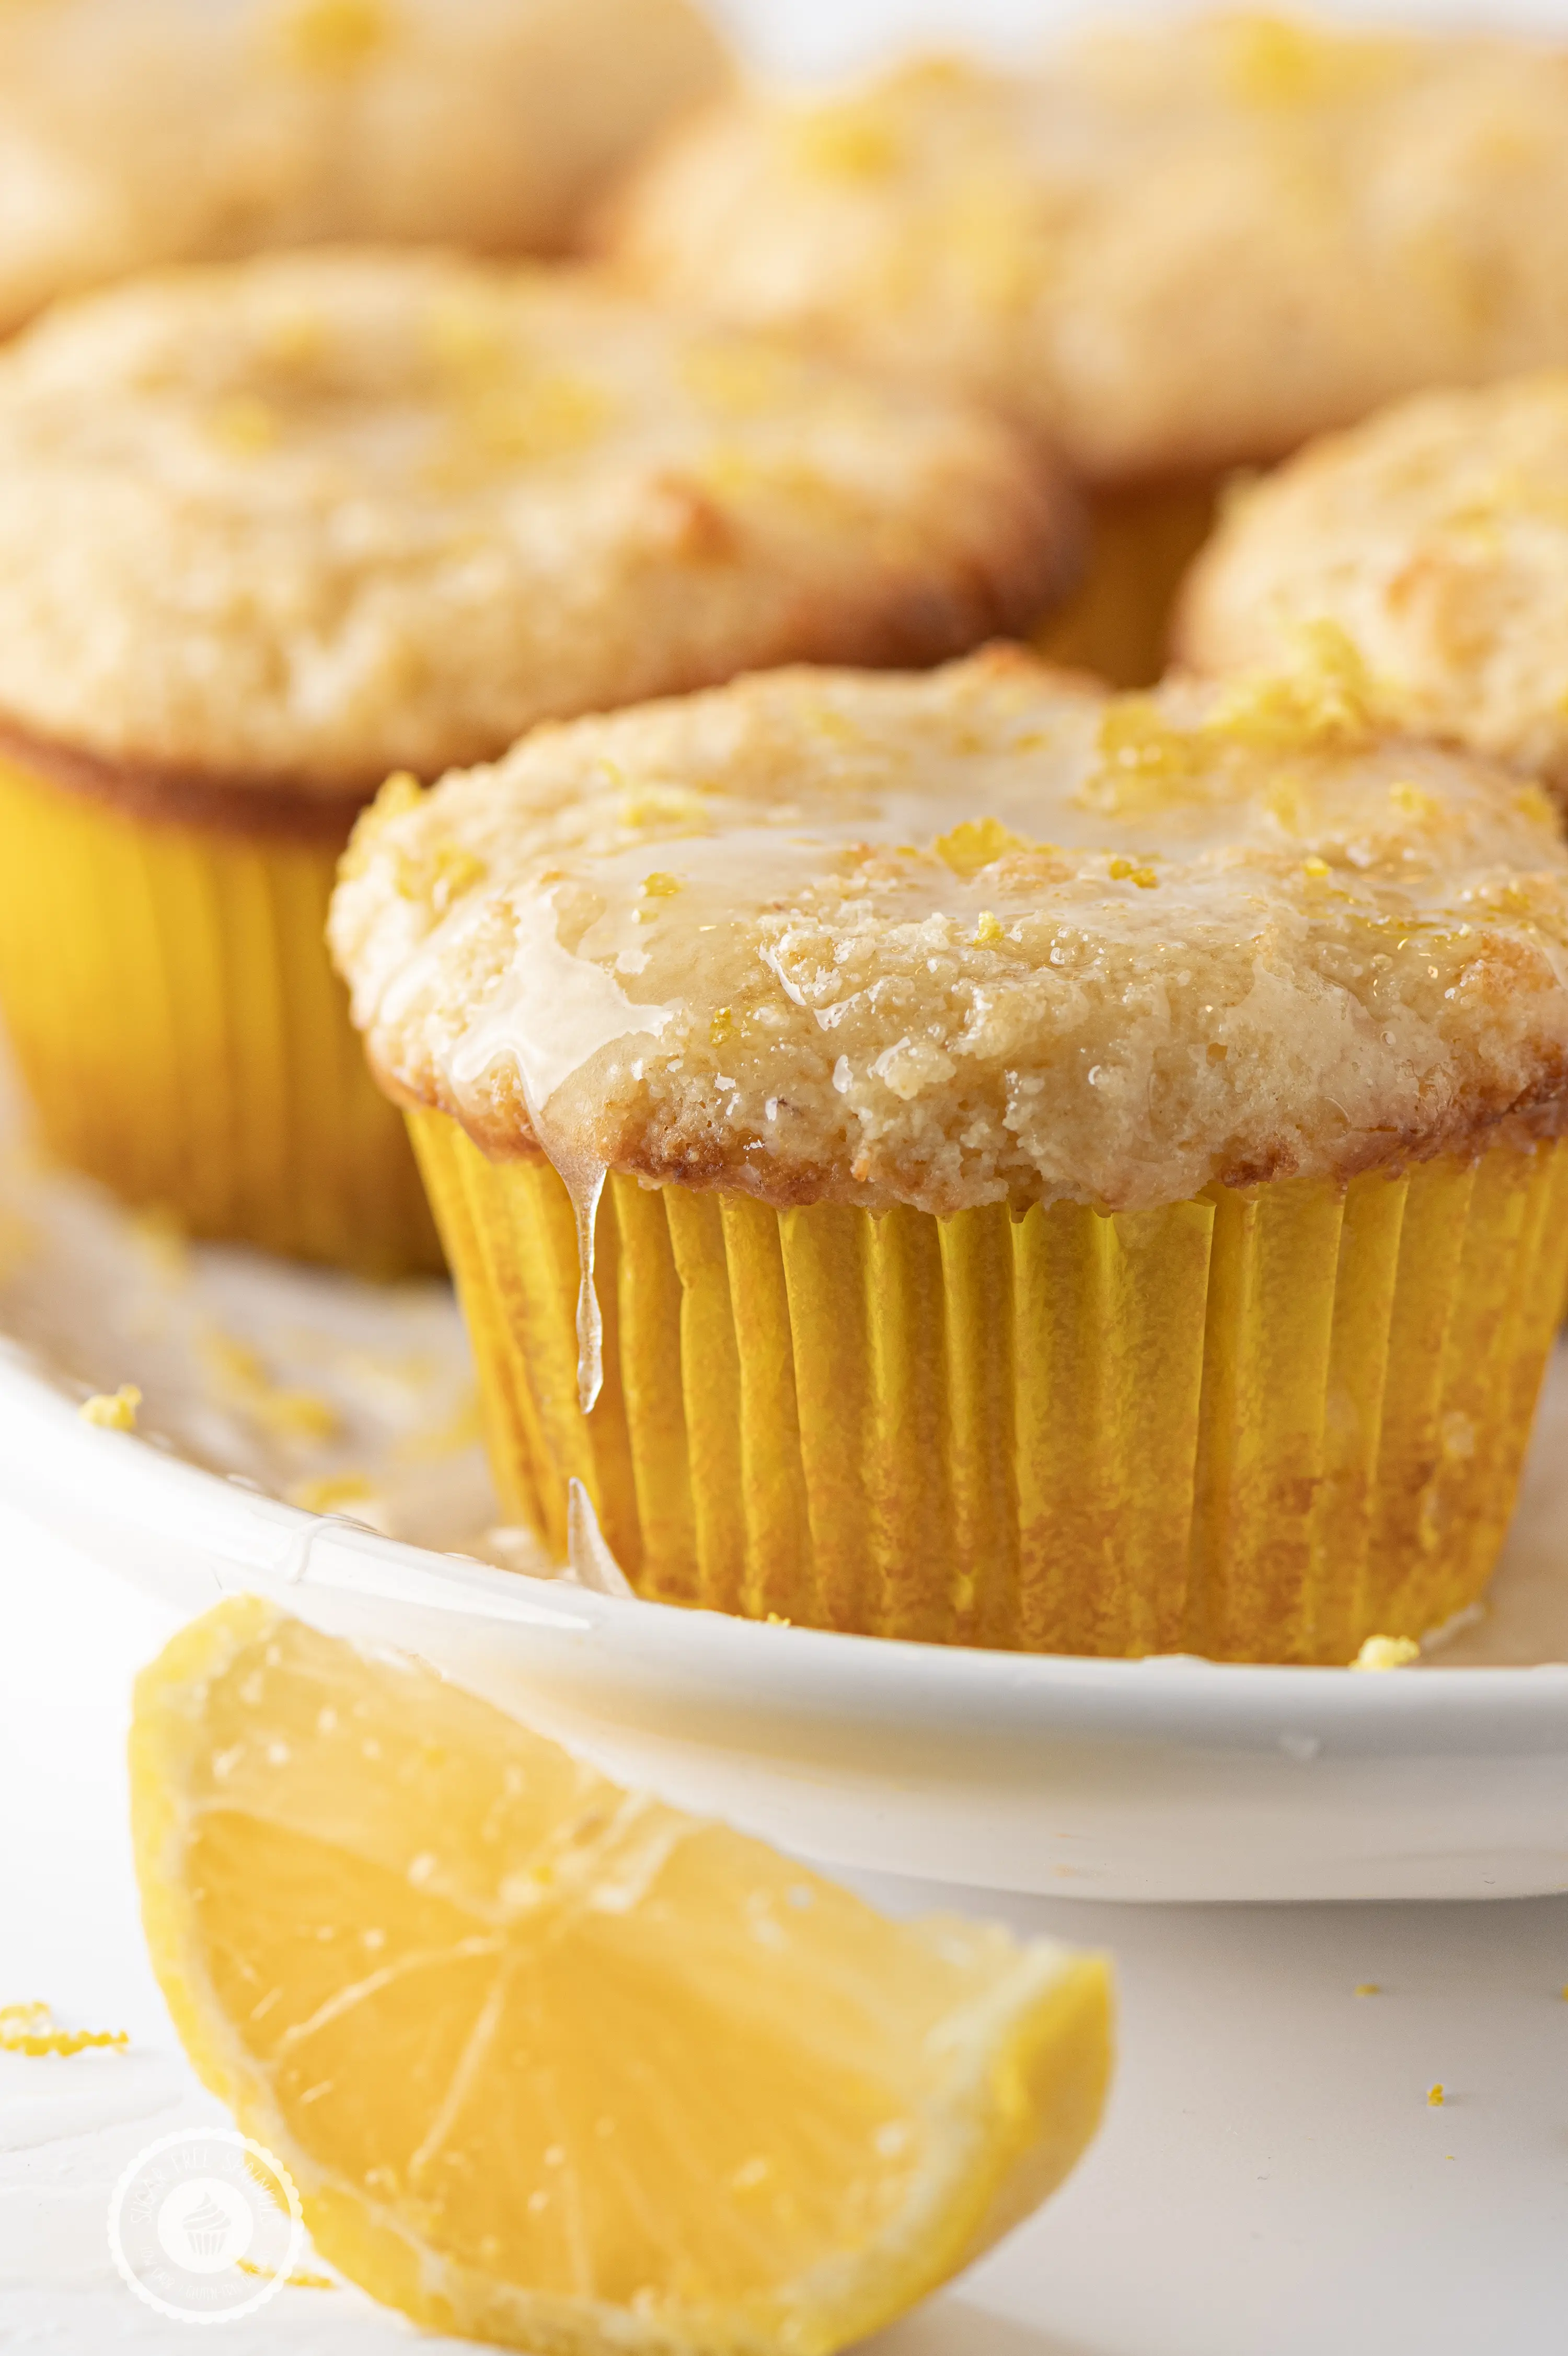 Lemon muffin in a yellow muffin liner, dripping with sticky glaze and topped with fresh lemon rind.  Muffins are stacked in behind slightly out of focus. 